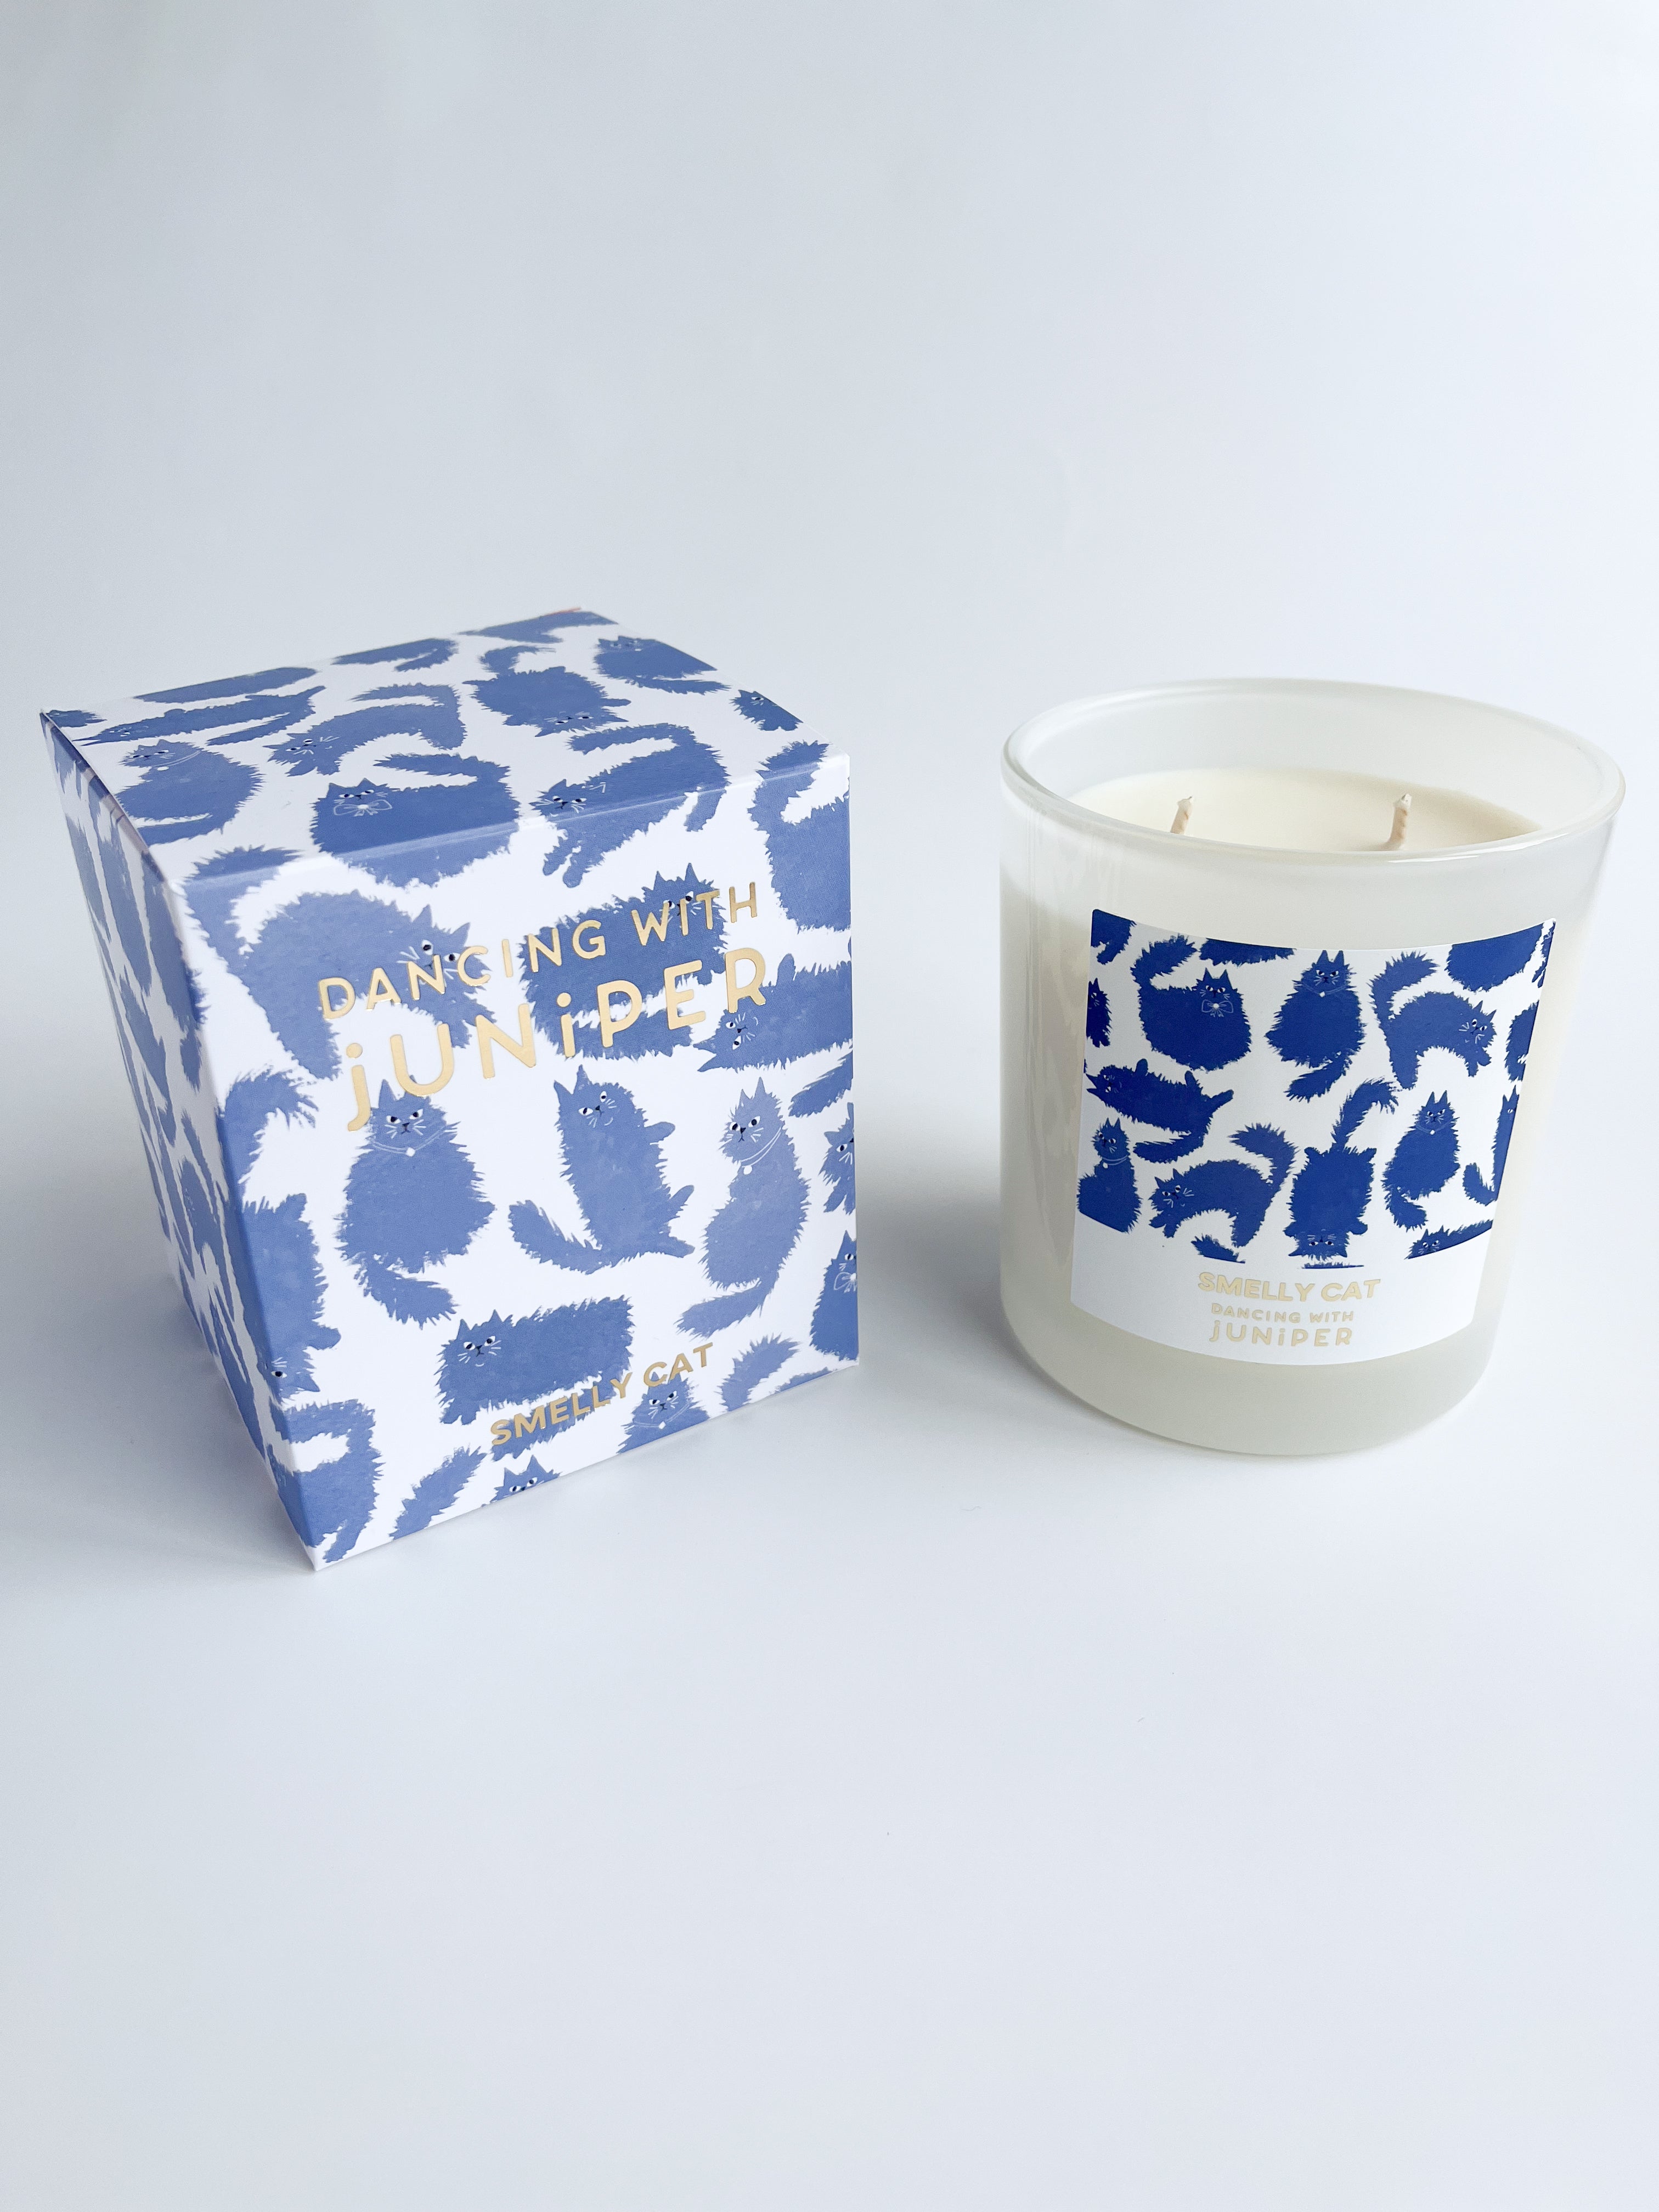 Smelly Cat Soy Candle - candle - Dancing with juniper